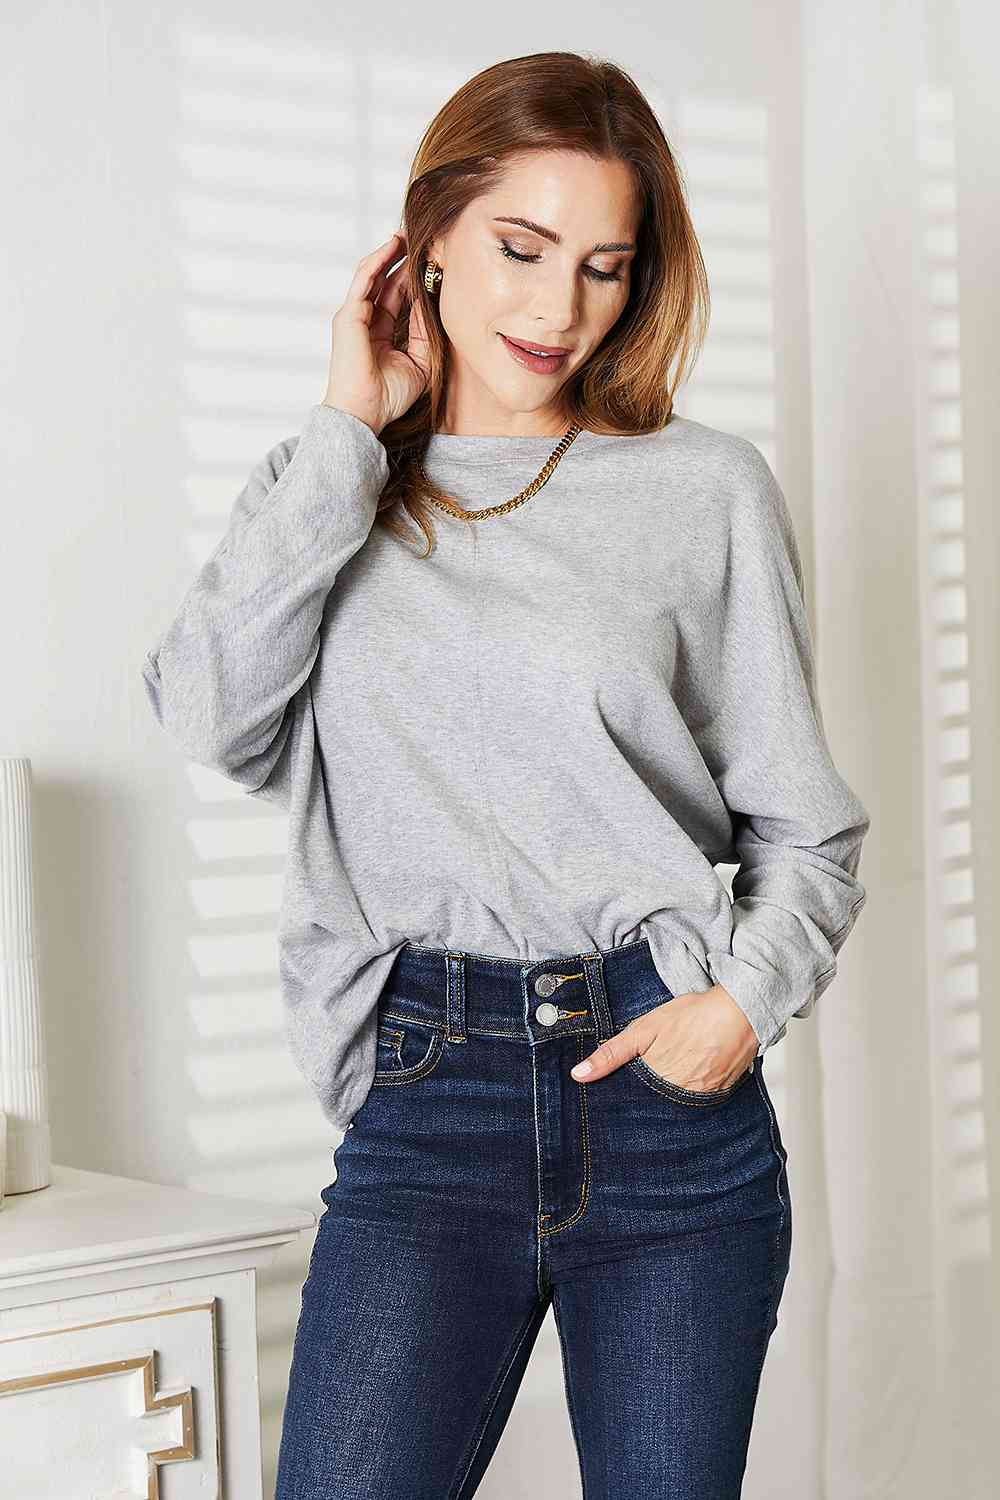 Double Take Seam Detail Round Neck Long Sleeve Top Gray No 3